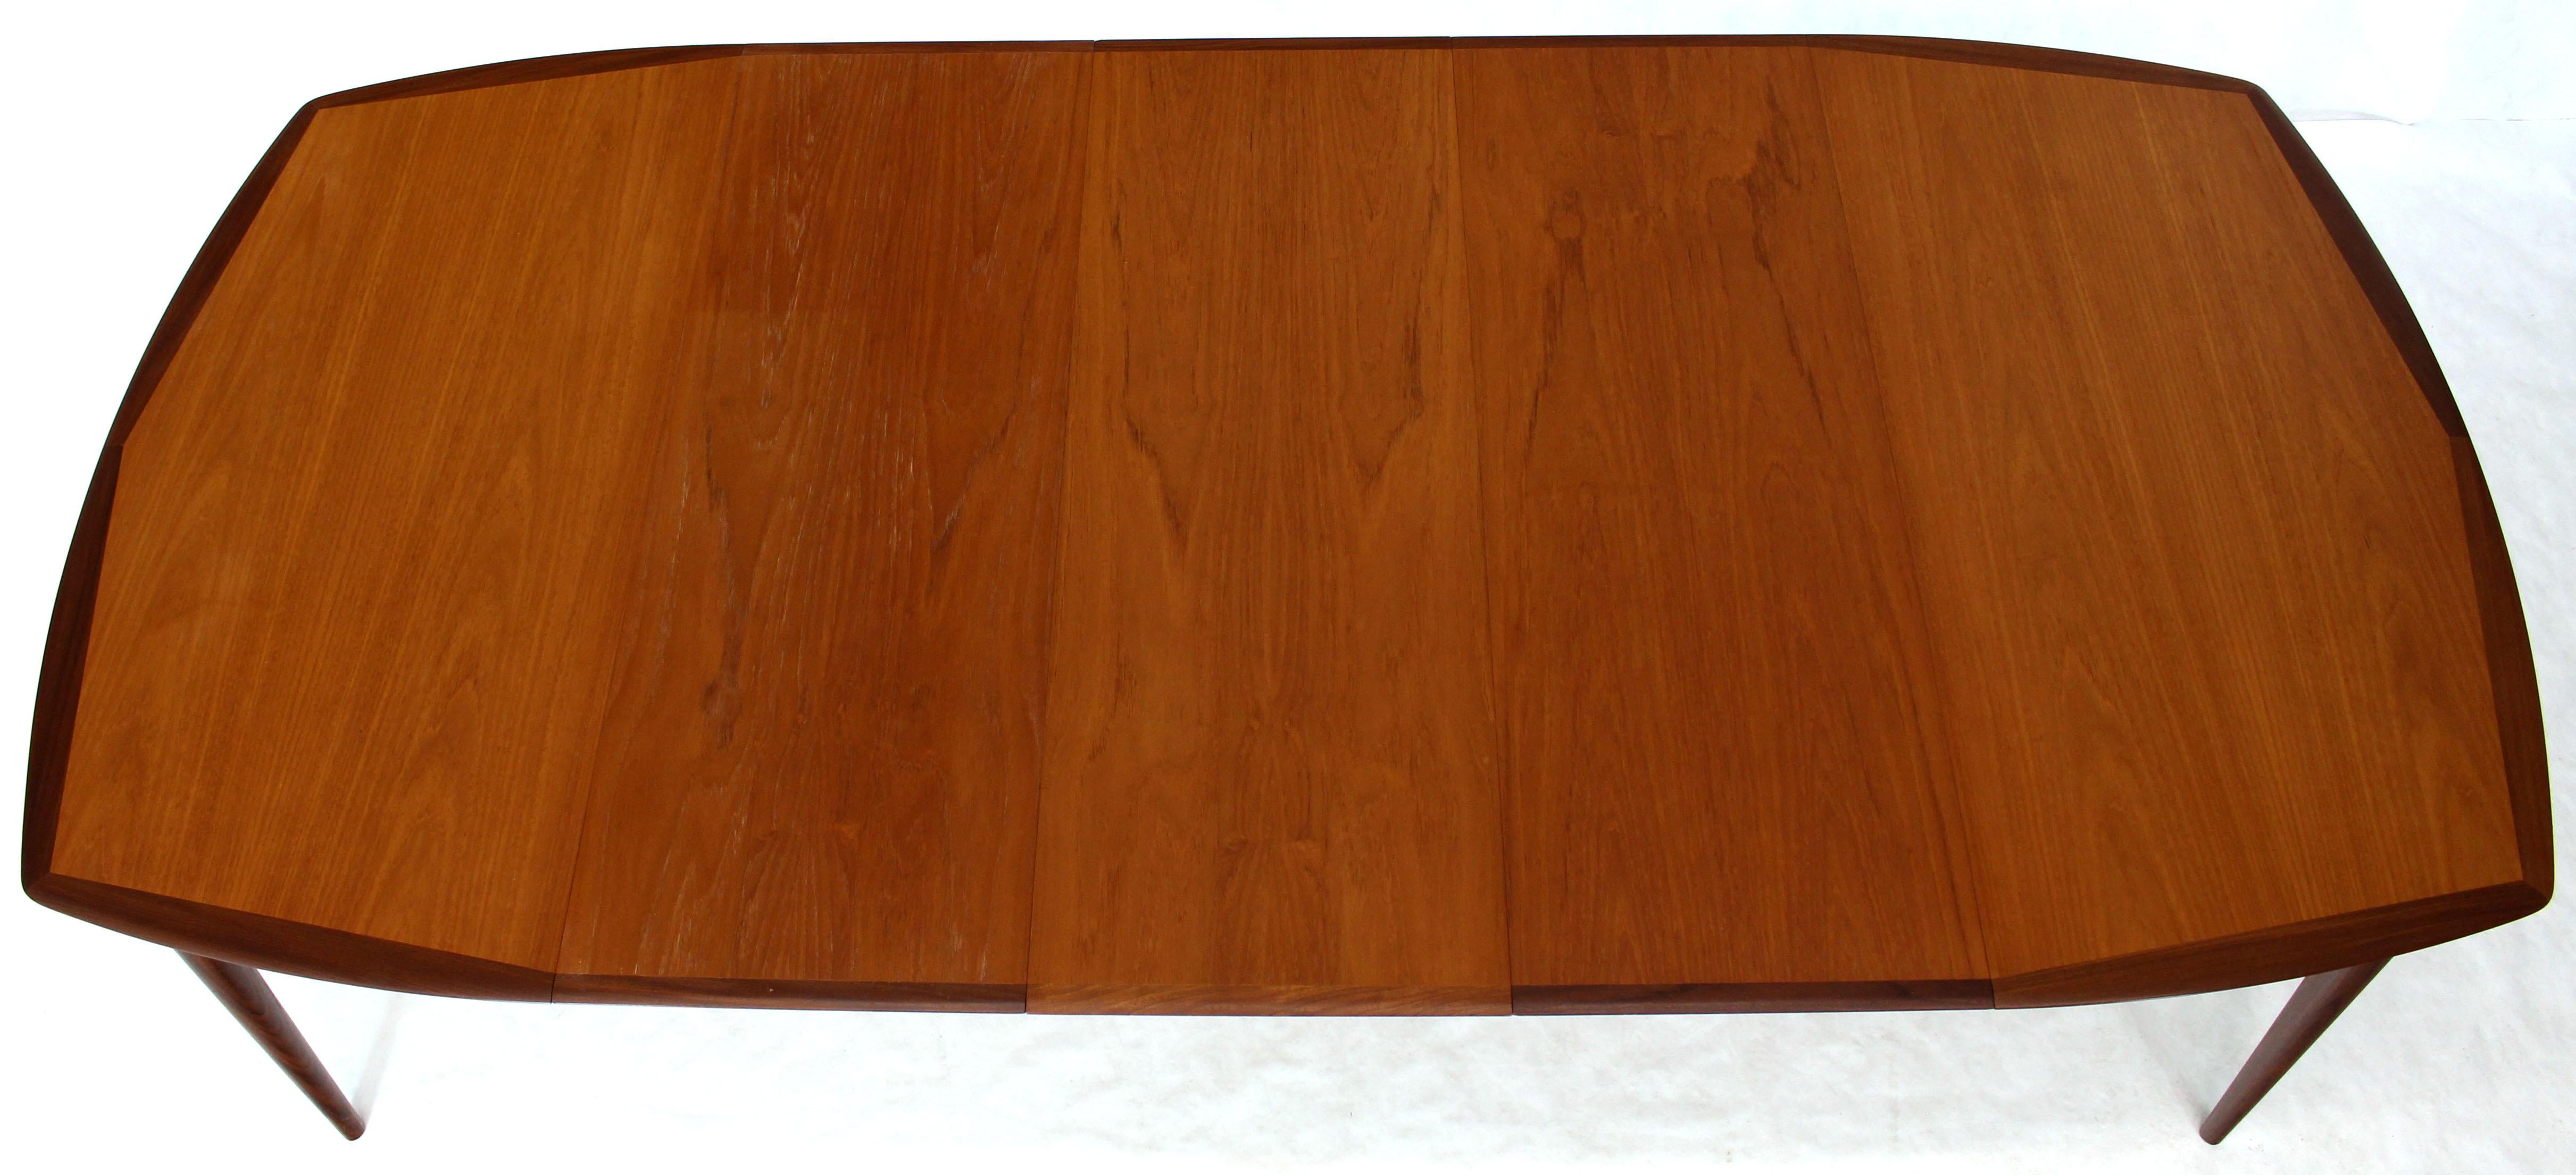 Danish Modern Square Two-Tone Teak Dining Table with 3 Leaves 3